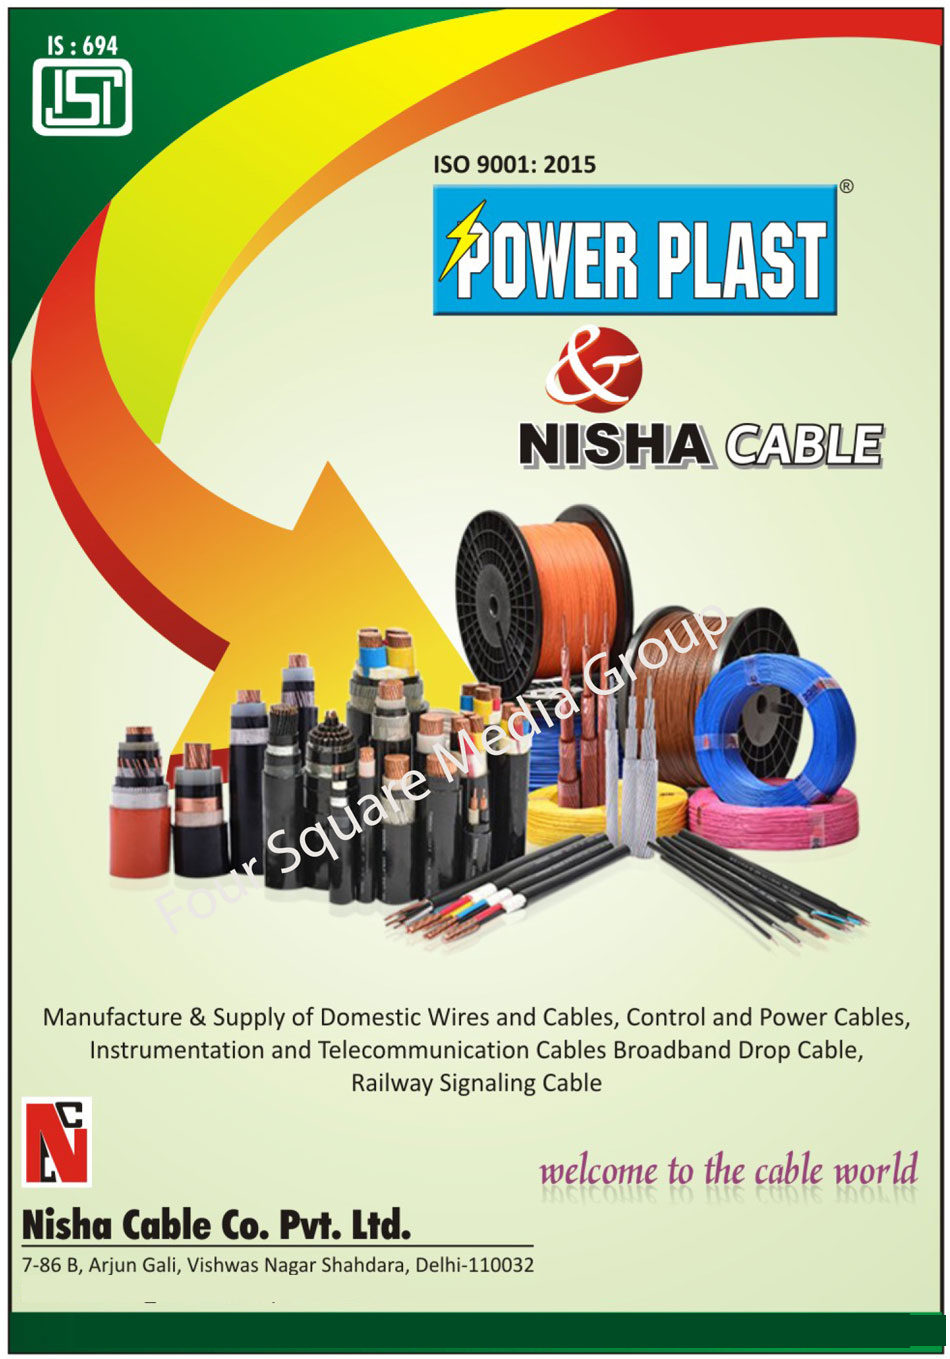 Domestic Wire, Domestic Cable, Control Cable, Power Cable, Instrumentation Cable, Telecommunication Cable, Broadband Drop Cable, Railway Signaling Cable